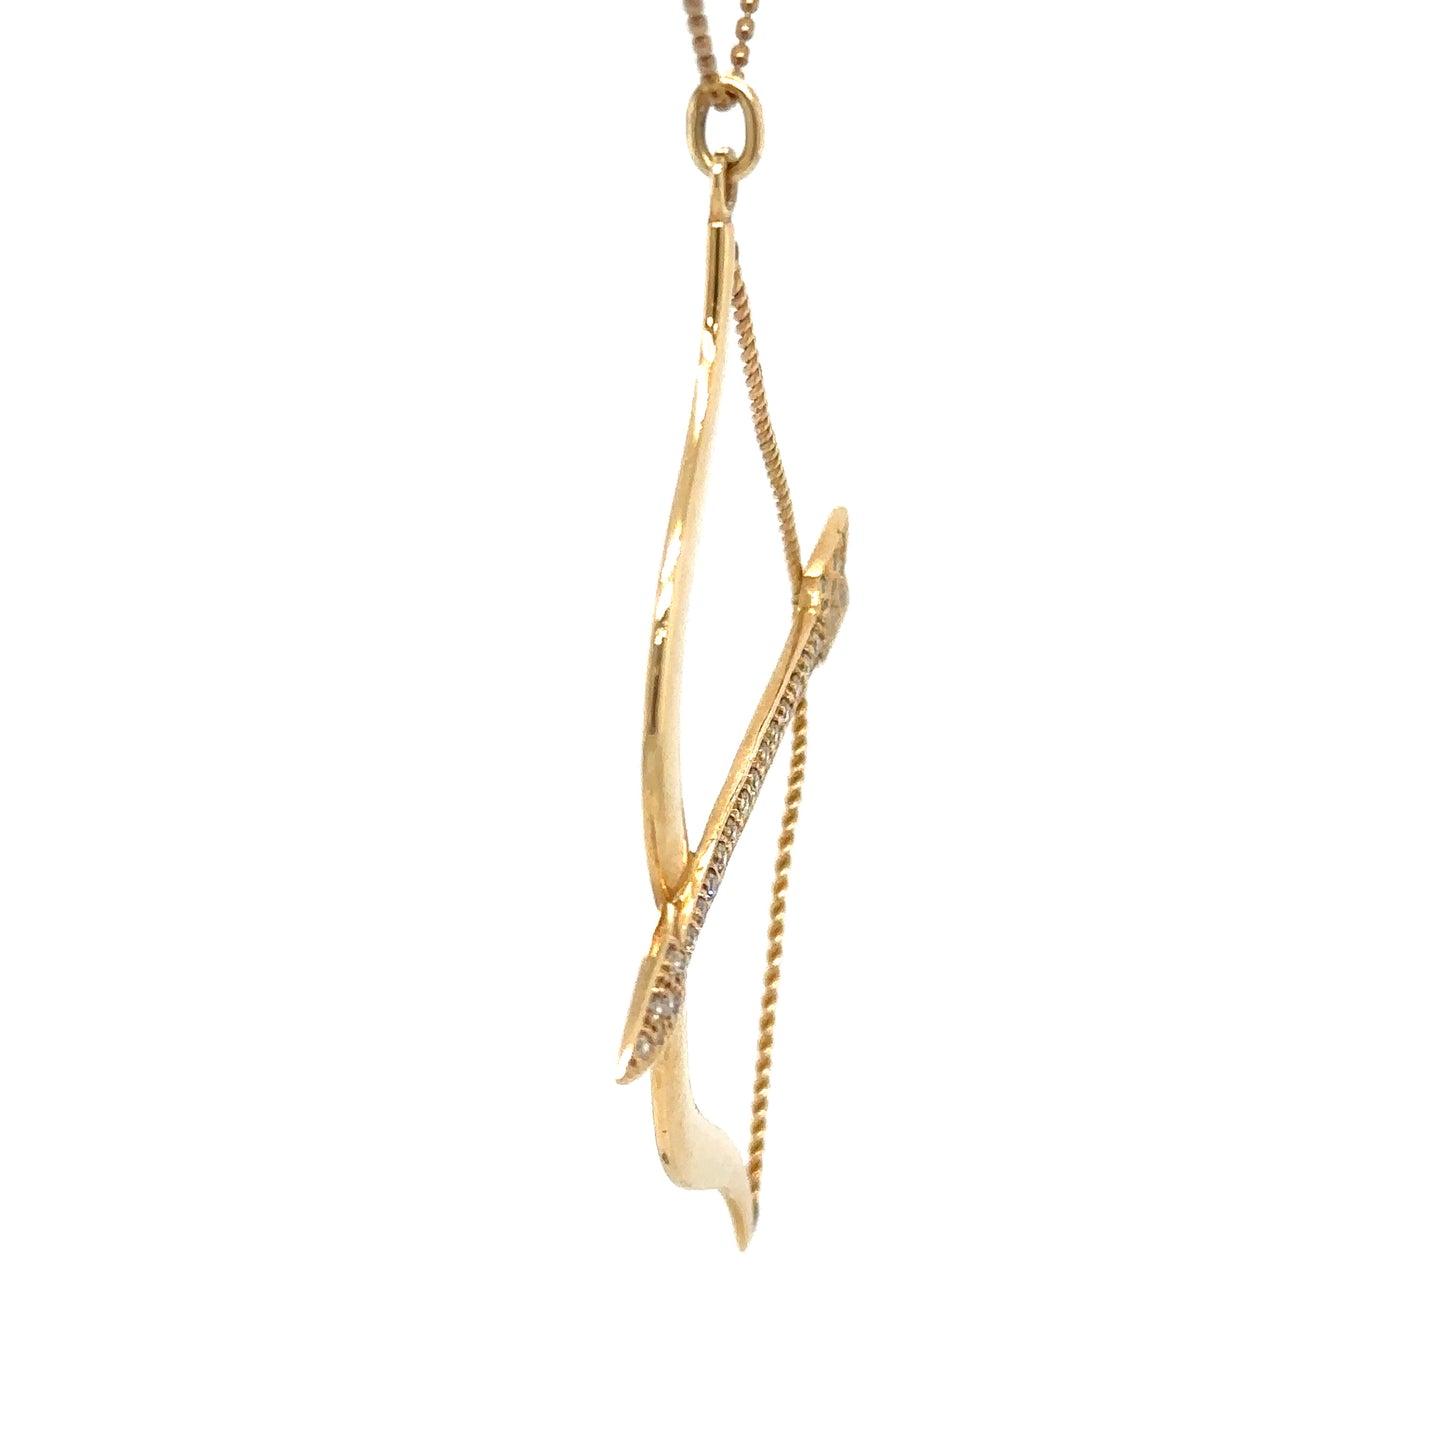 Circa 2000s Diamond Bow and Arrow Pendant and Chain in 14K Gold